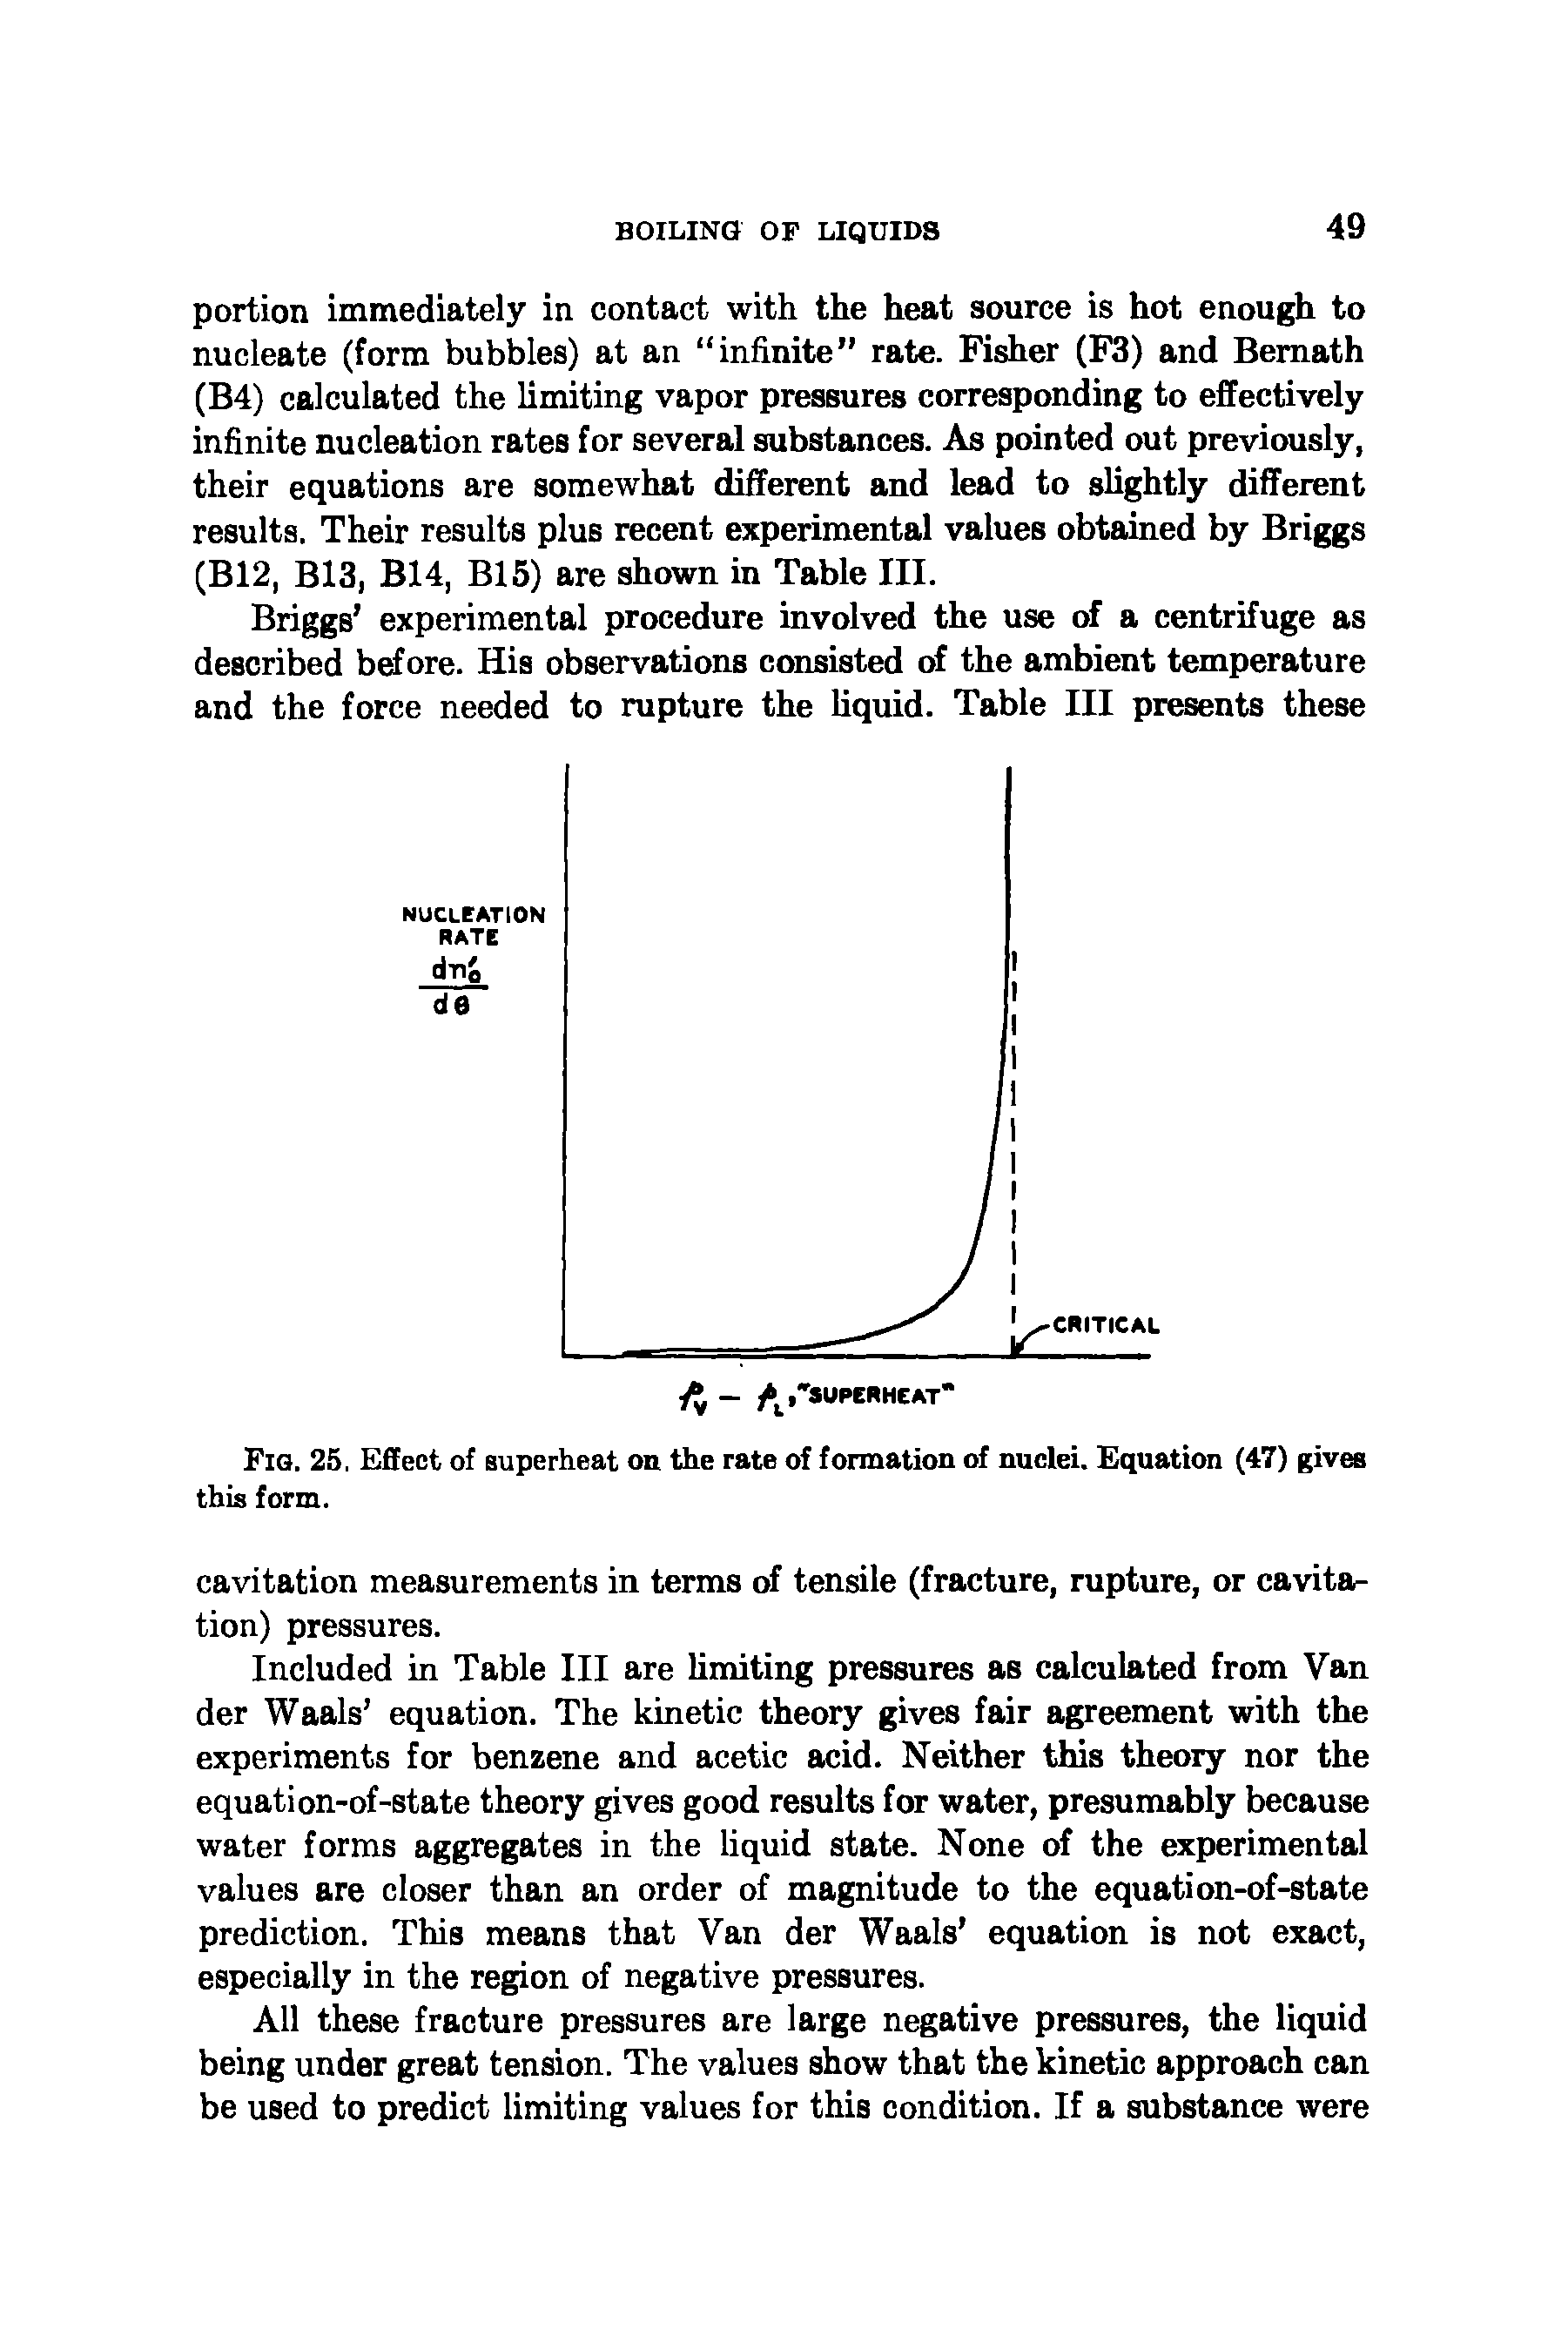 Fig. 25. Effect of superheat on the rate of formation of nuclei. Equation (47) gives this form.